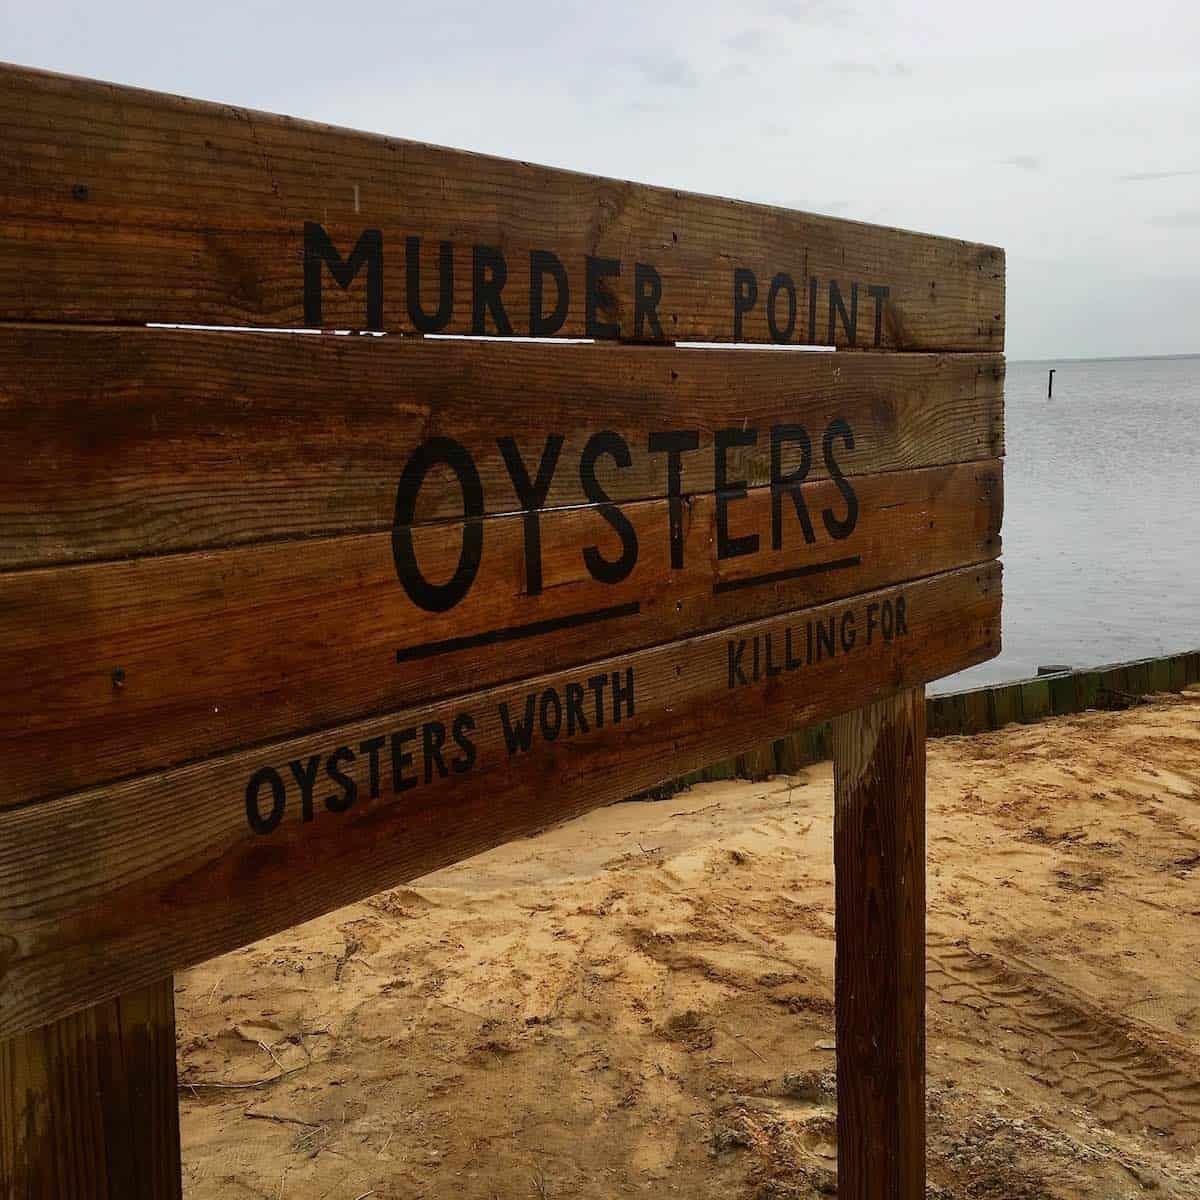 Murder Point Oyster sign